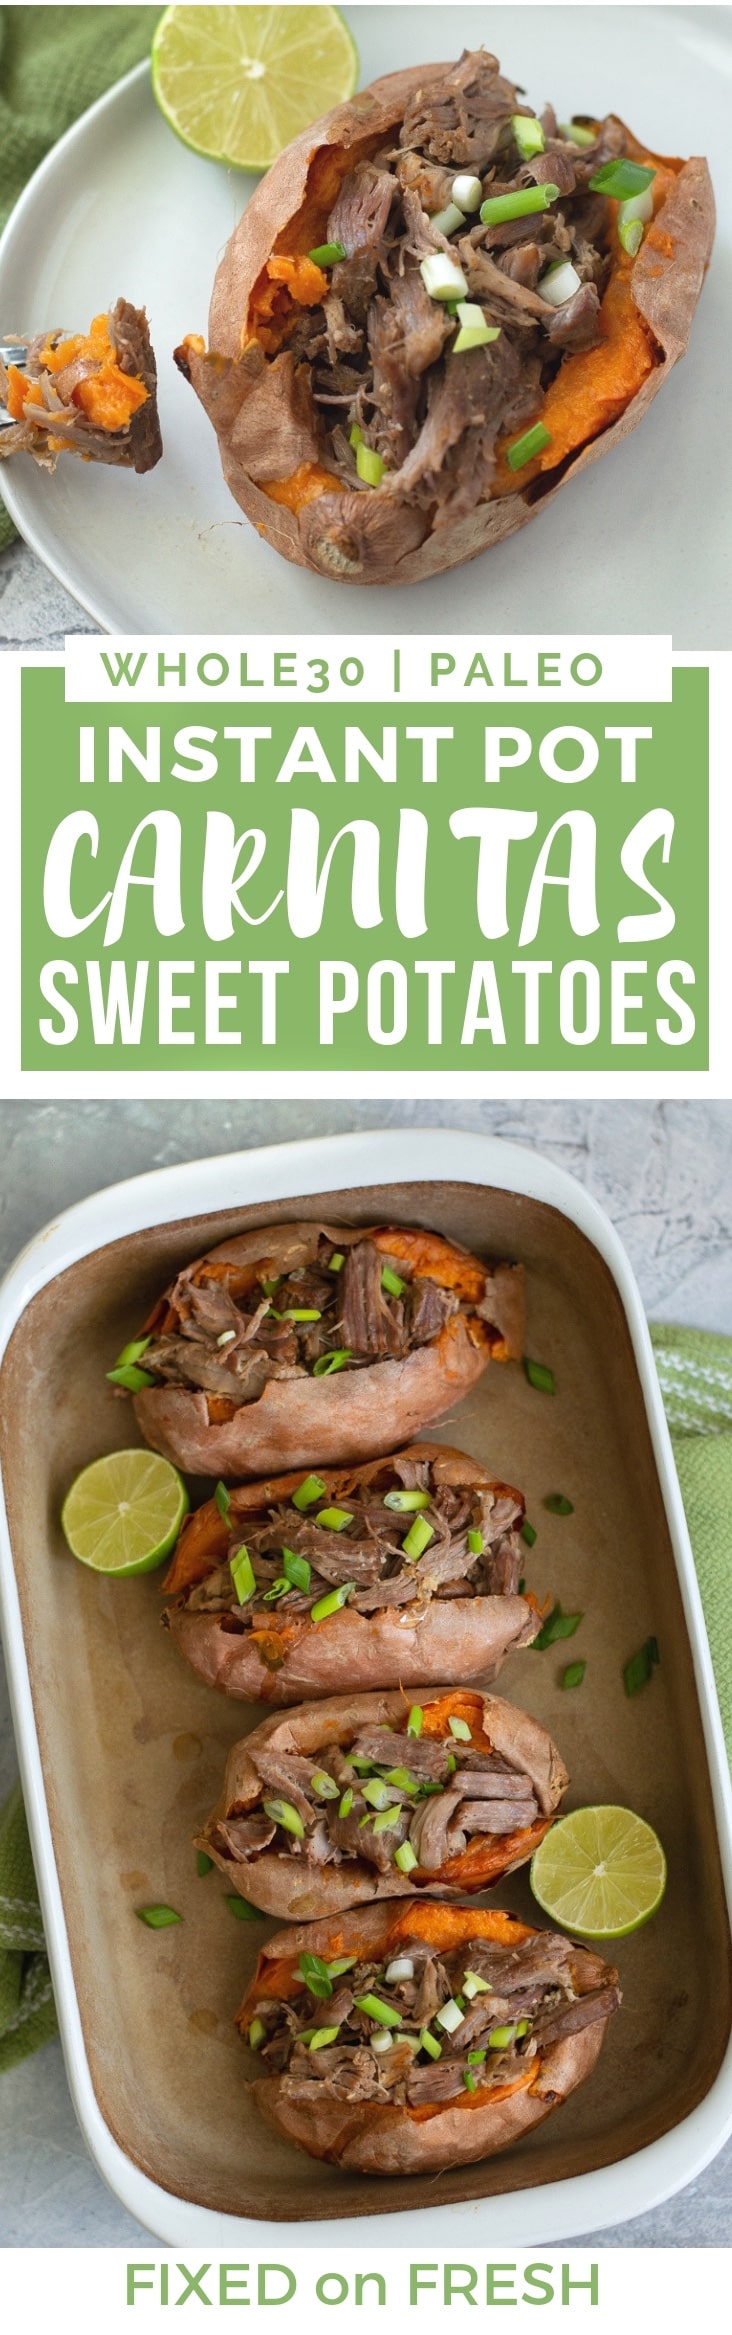 Instant Pot Carnitas are stuffed into simple baked sweet potatoes. This recipe is great for a healthy meal prep lunch or for the whole family to enjoy. 